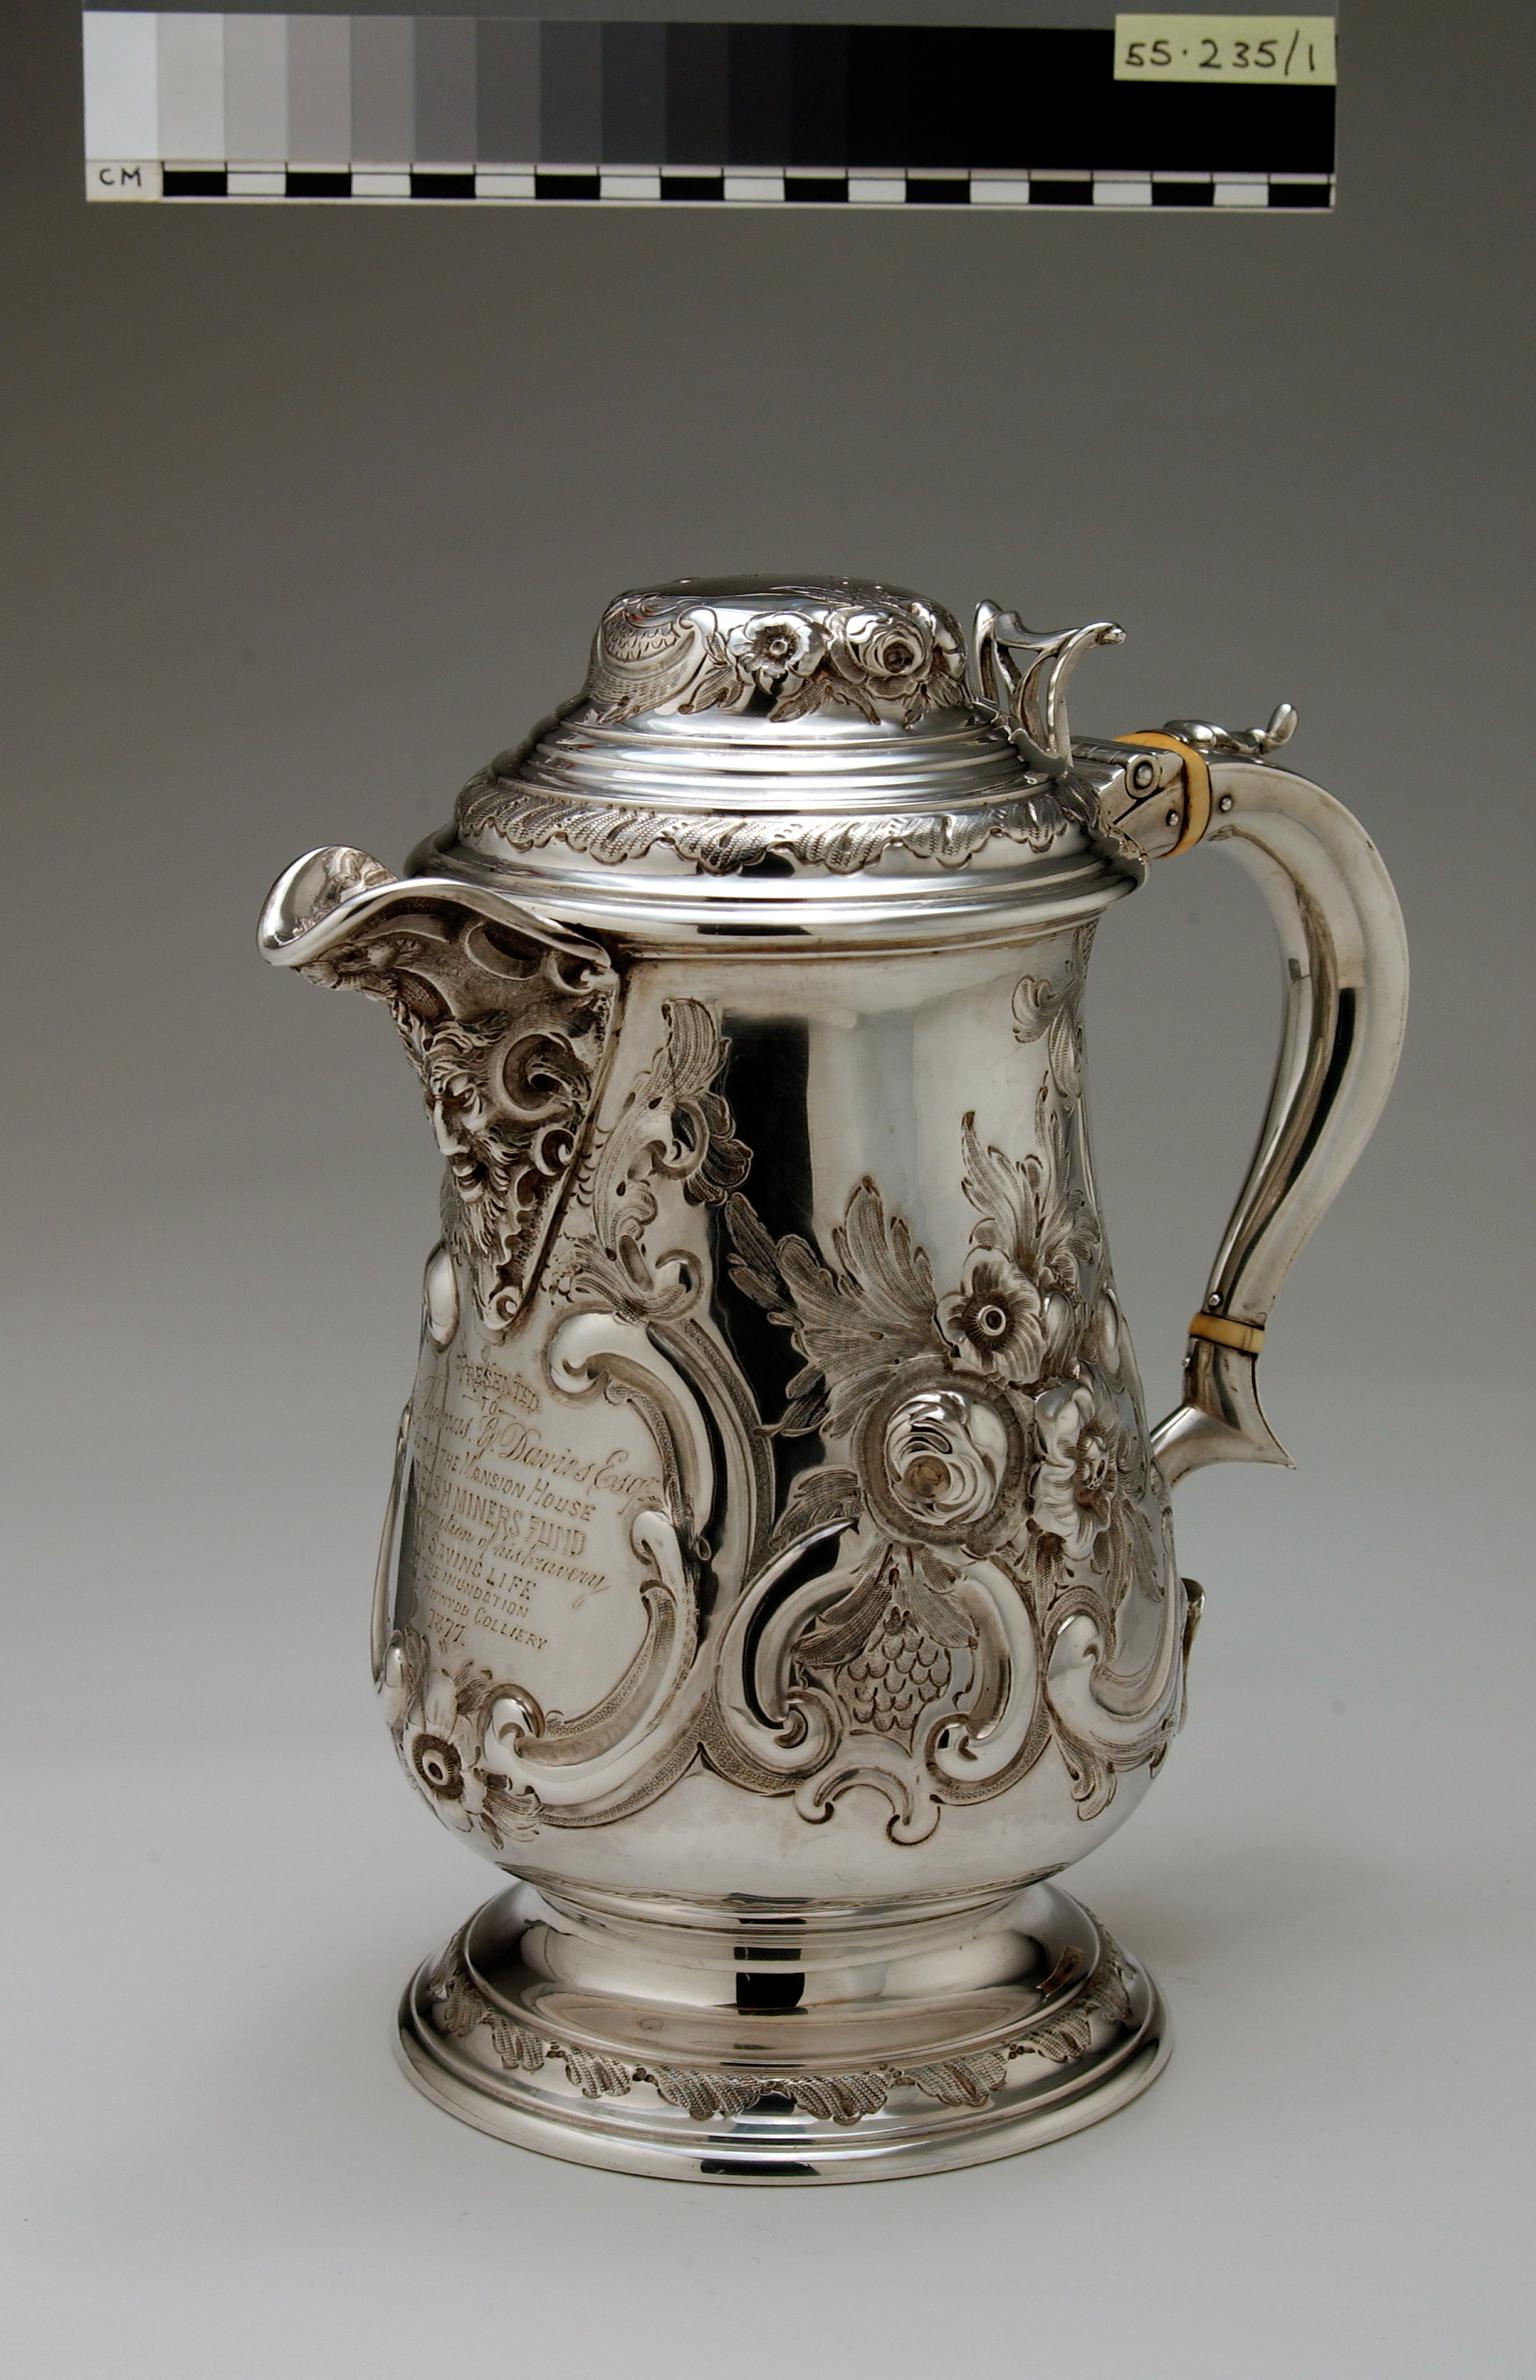 Mansion House Welsh Miners' Fund, silver ewer